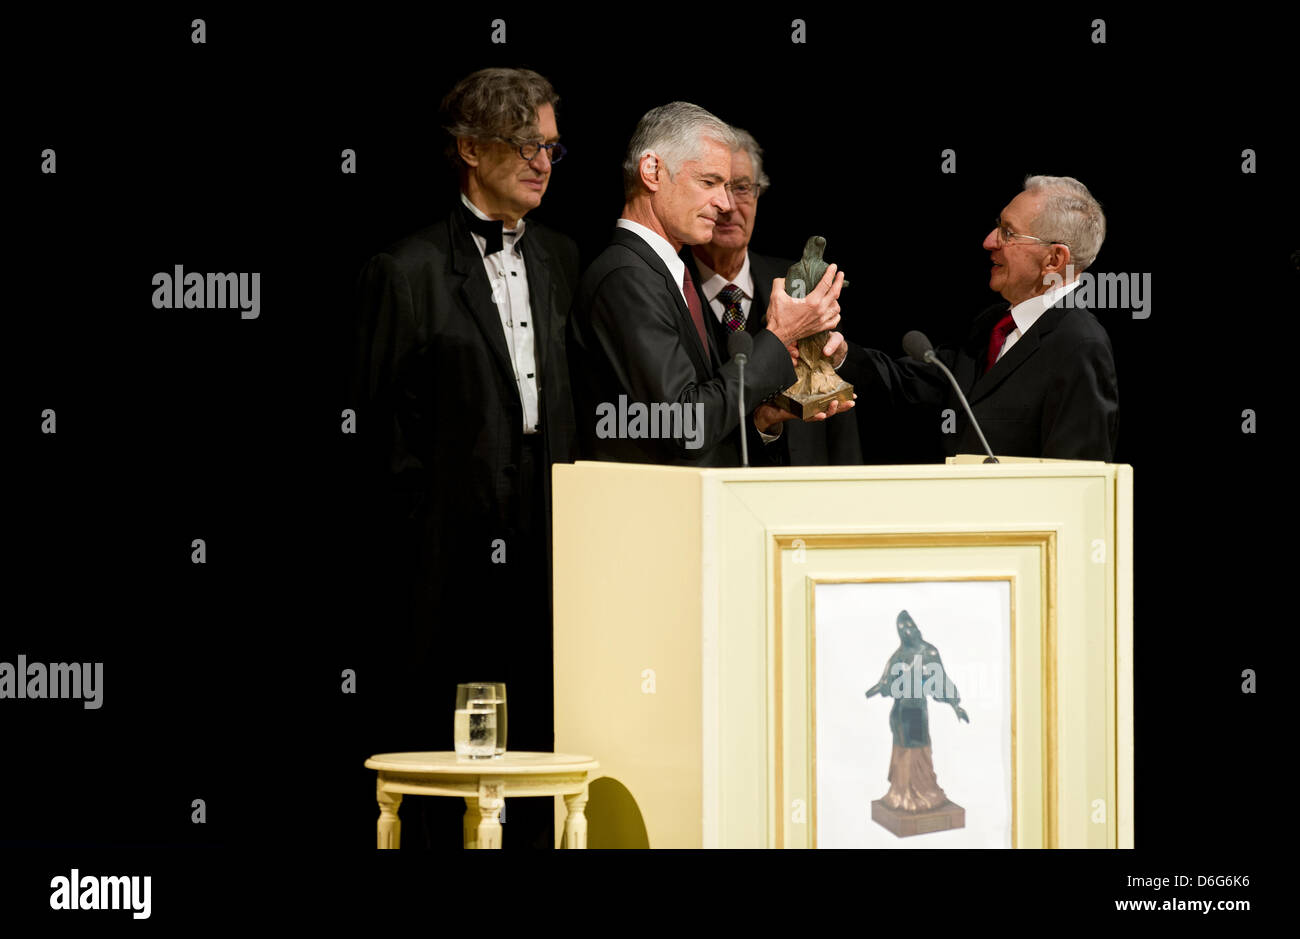 American documentary photographer James Nachtwey (2 L) receives the 3rd international peace prize, the Dresden Prize, from Hans-Joachim Dietze (R), who took unique photos of the firestorm in Dresden when he was 15 in 1945, at the Semper Opera in Dresden, Germany, 11 February 2012. German director Wim Wenders (L) gave the laudatory speech, former Interior Minister Gerhart Baum moder Stock Photo